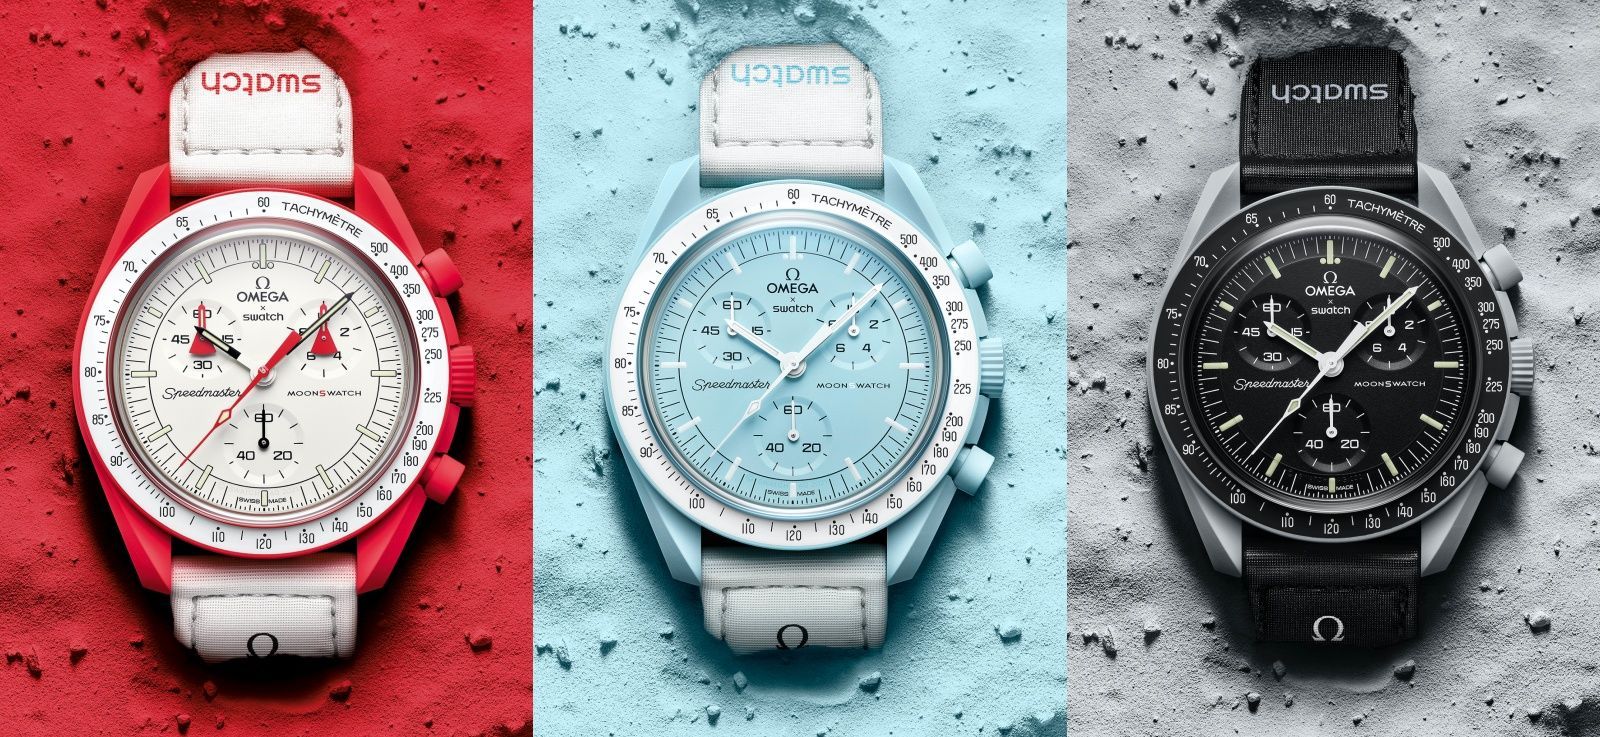 The MoonSwatch: An expert explains whether it’s really worth the hype